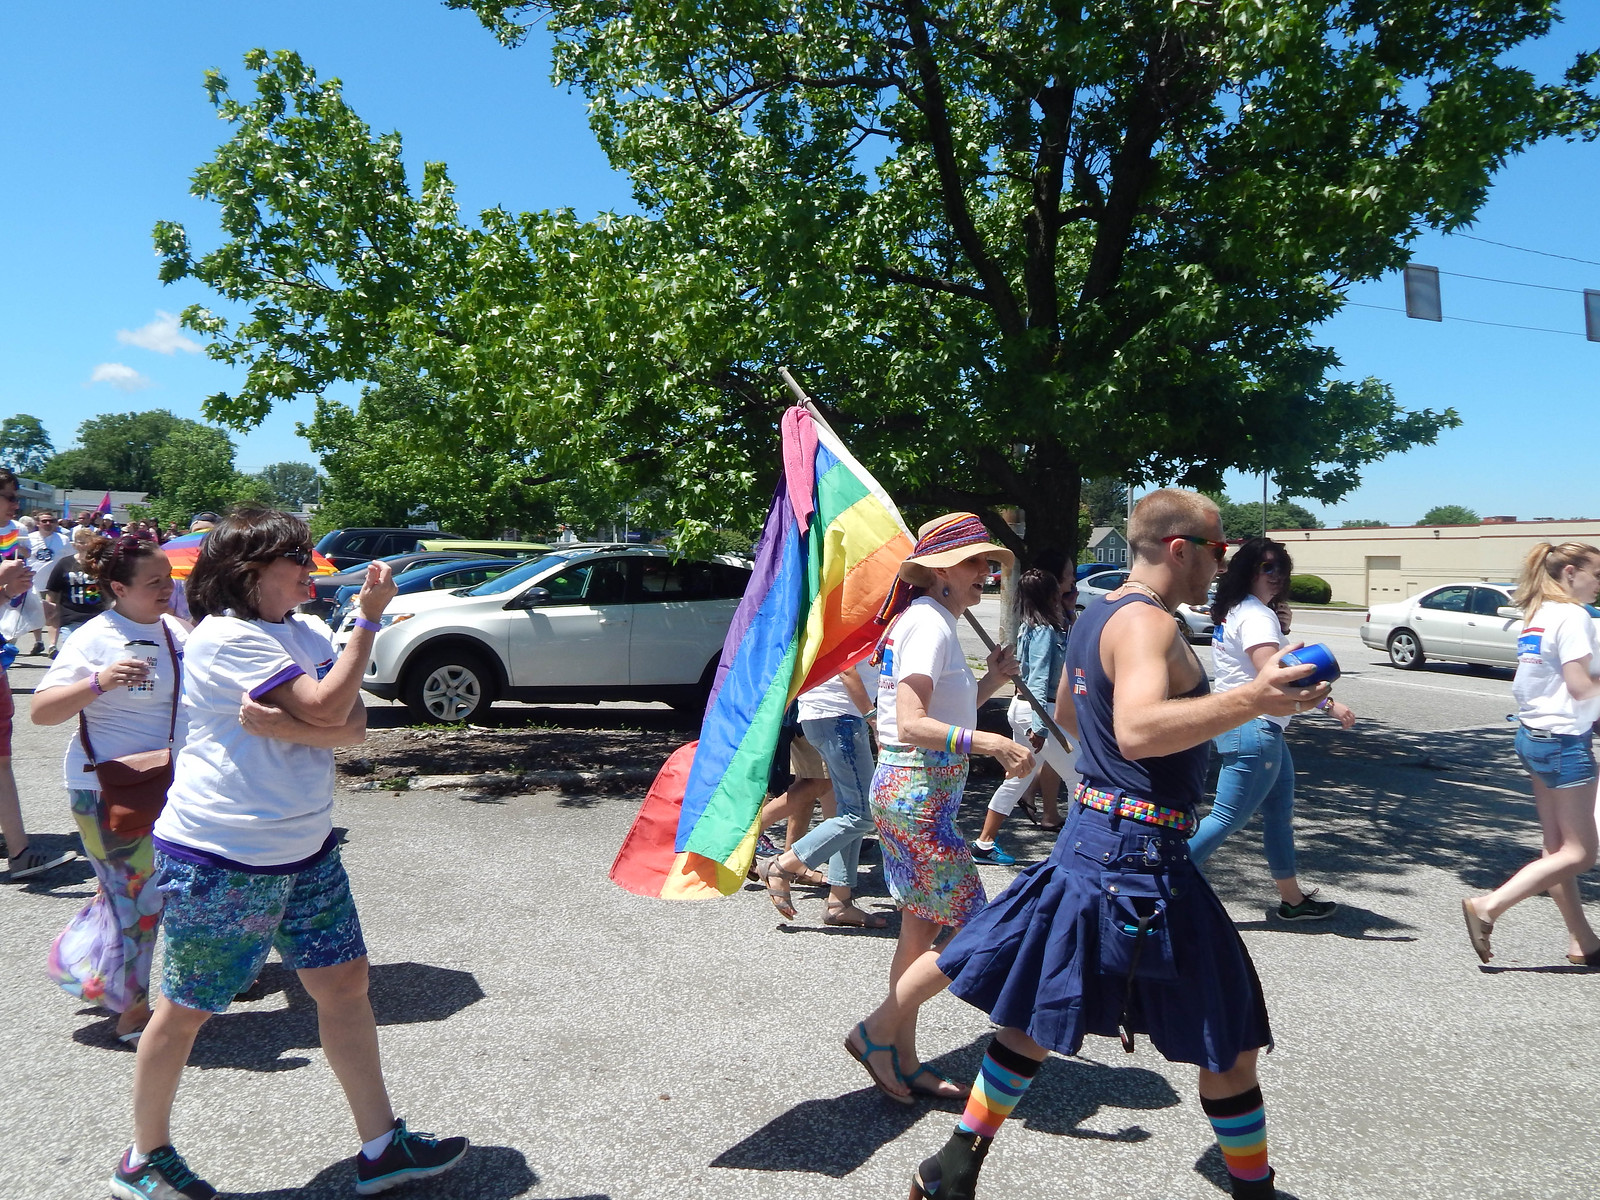 Kathy Dahlkemper carrying rainbow flag next to her son Nate